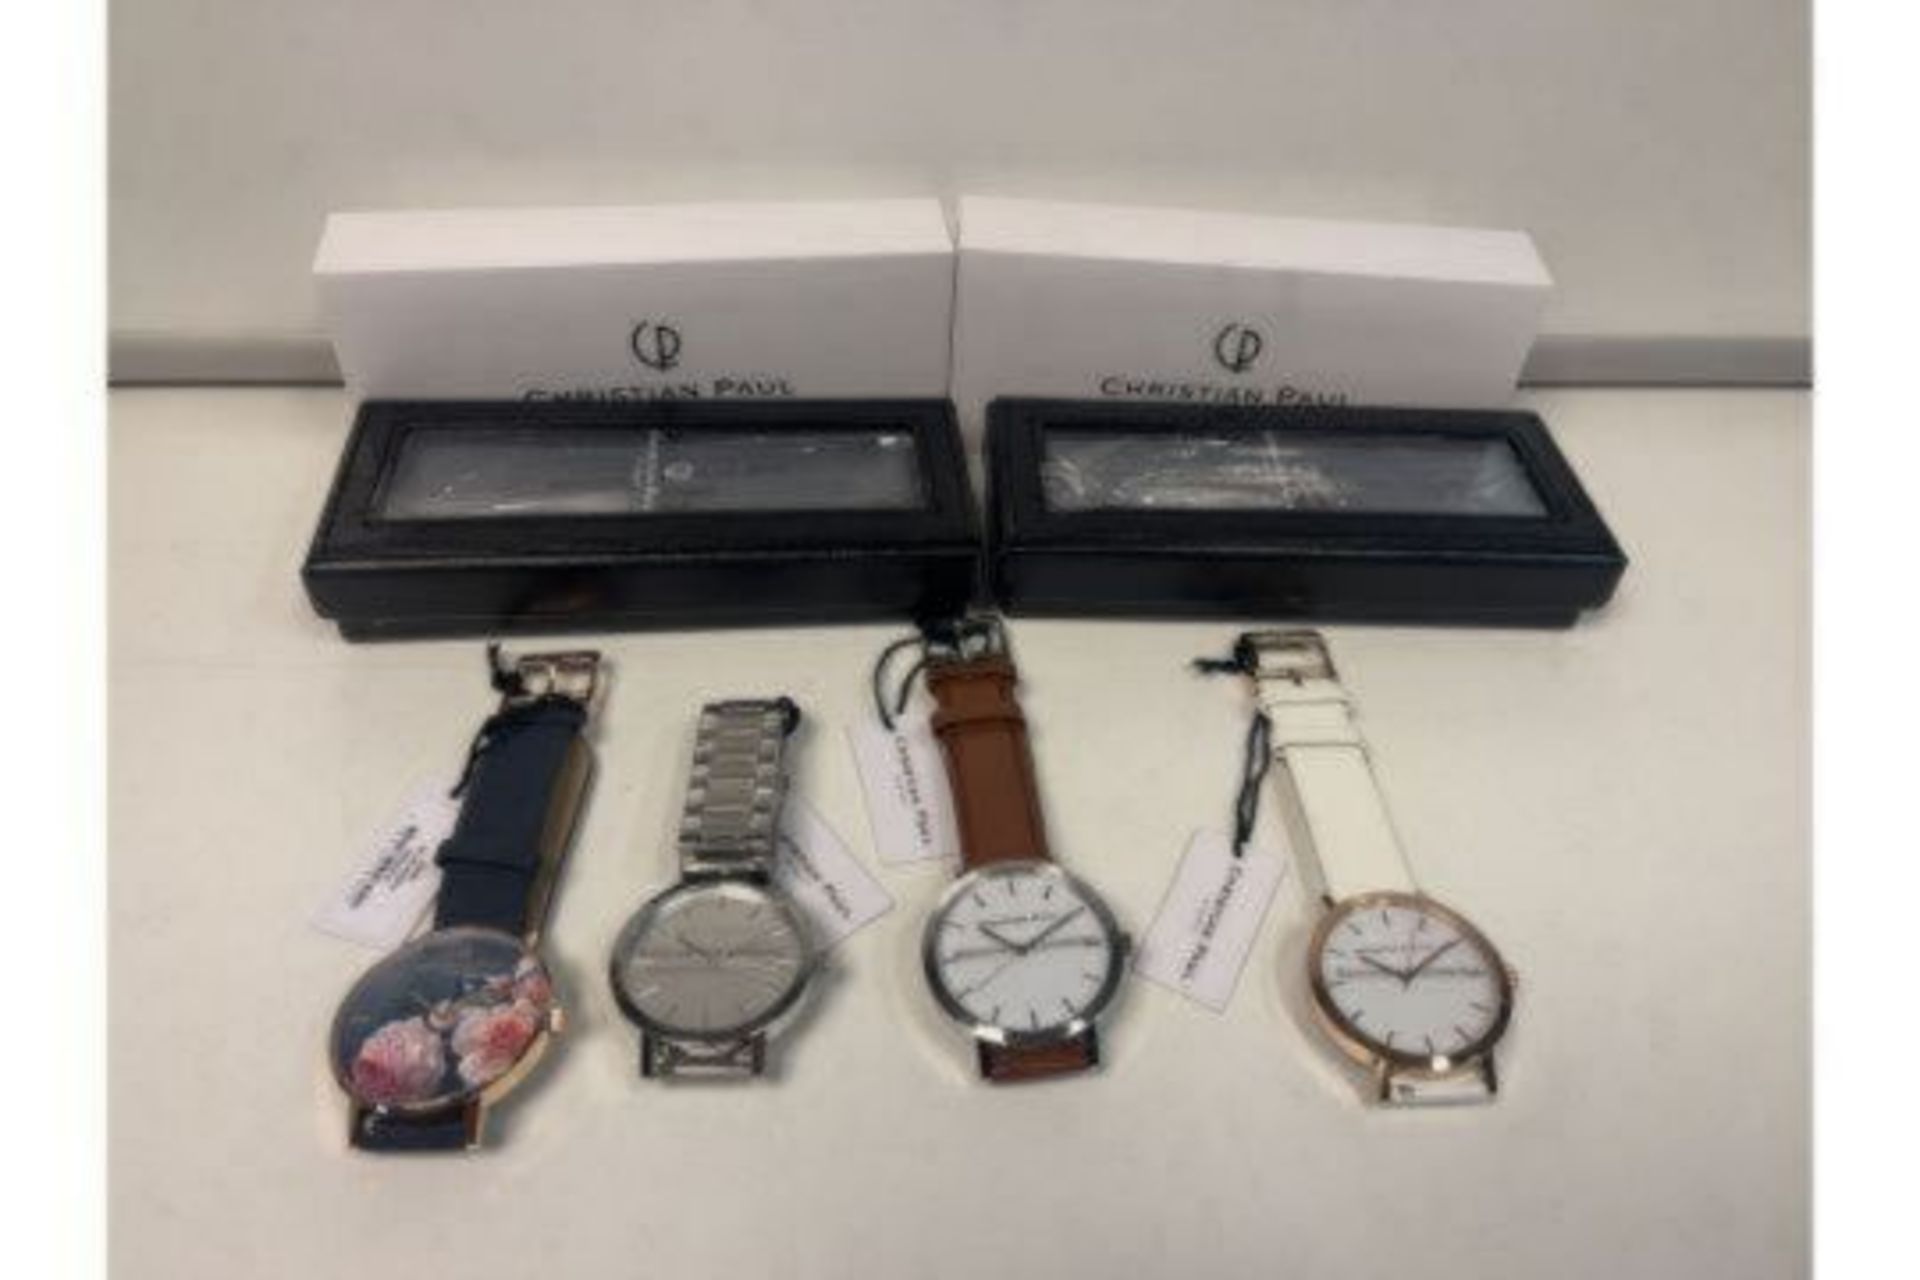 4 X BRAND NEW CHRISTIAN PAUL LUXURY WATCHES IN VARIOUS DESIGNS RRP £99-129 EACH OFF